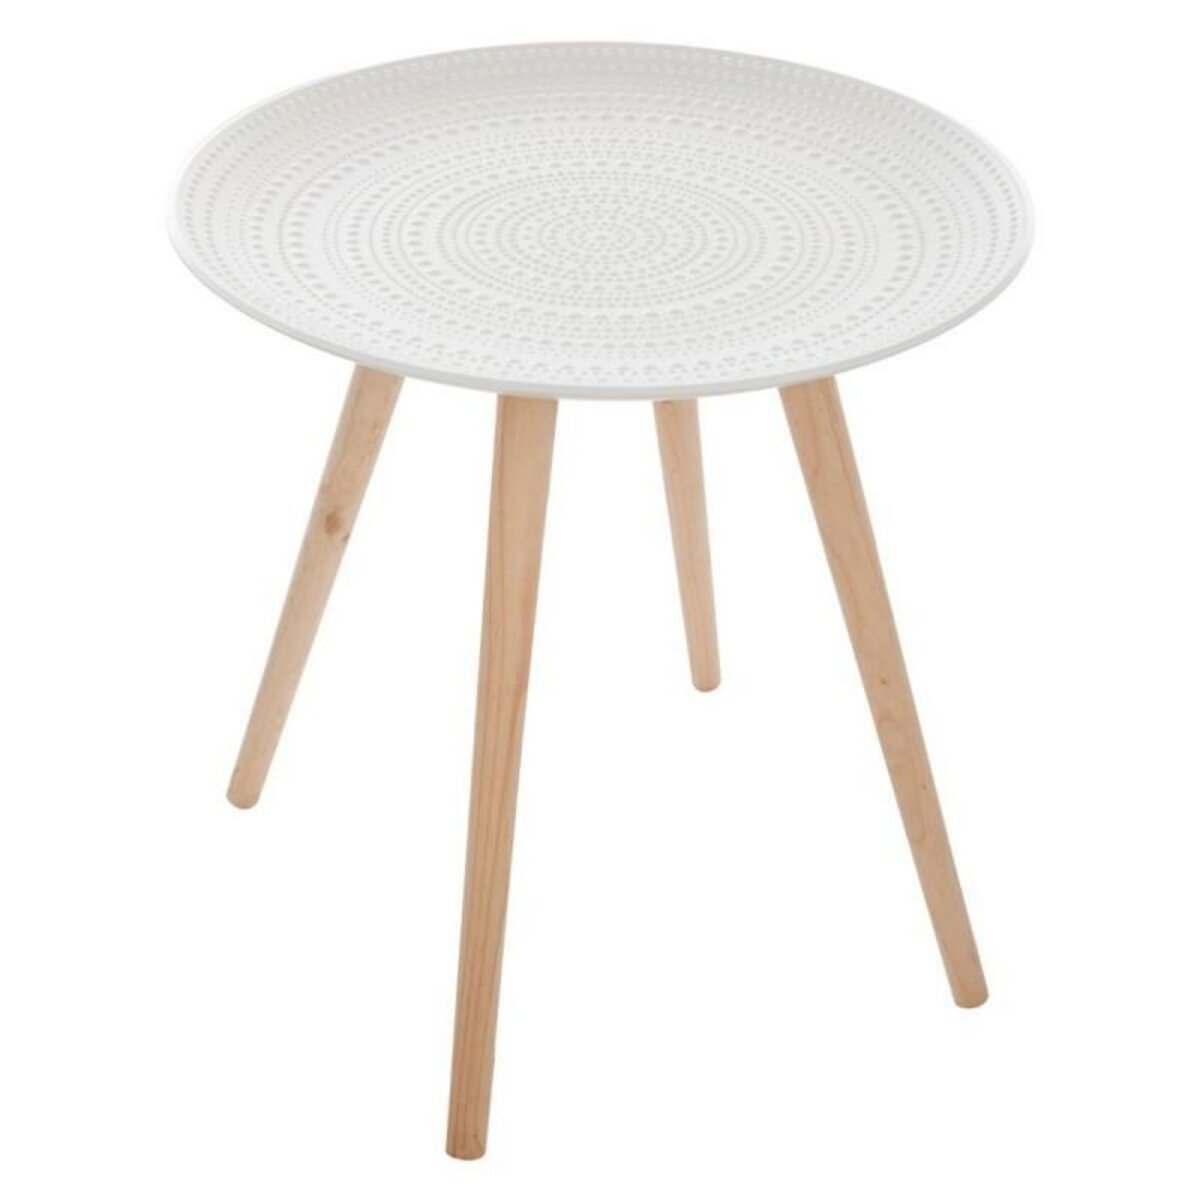  Table d'Appoint Scandinave  Mileo  49cm Blanc